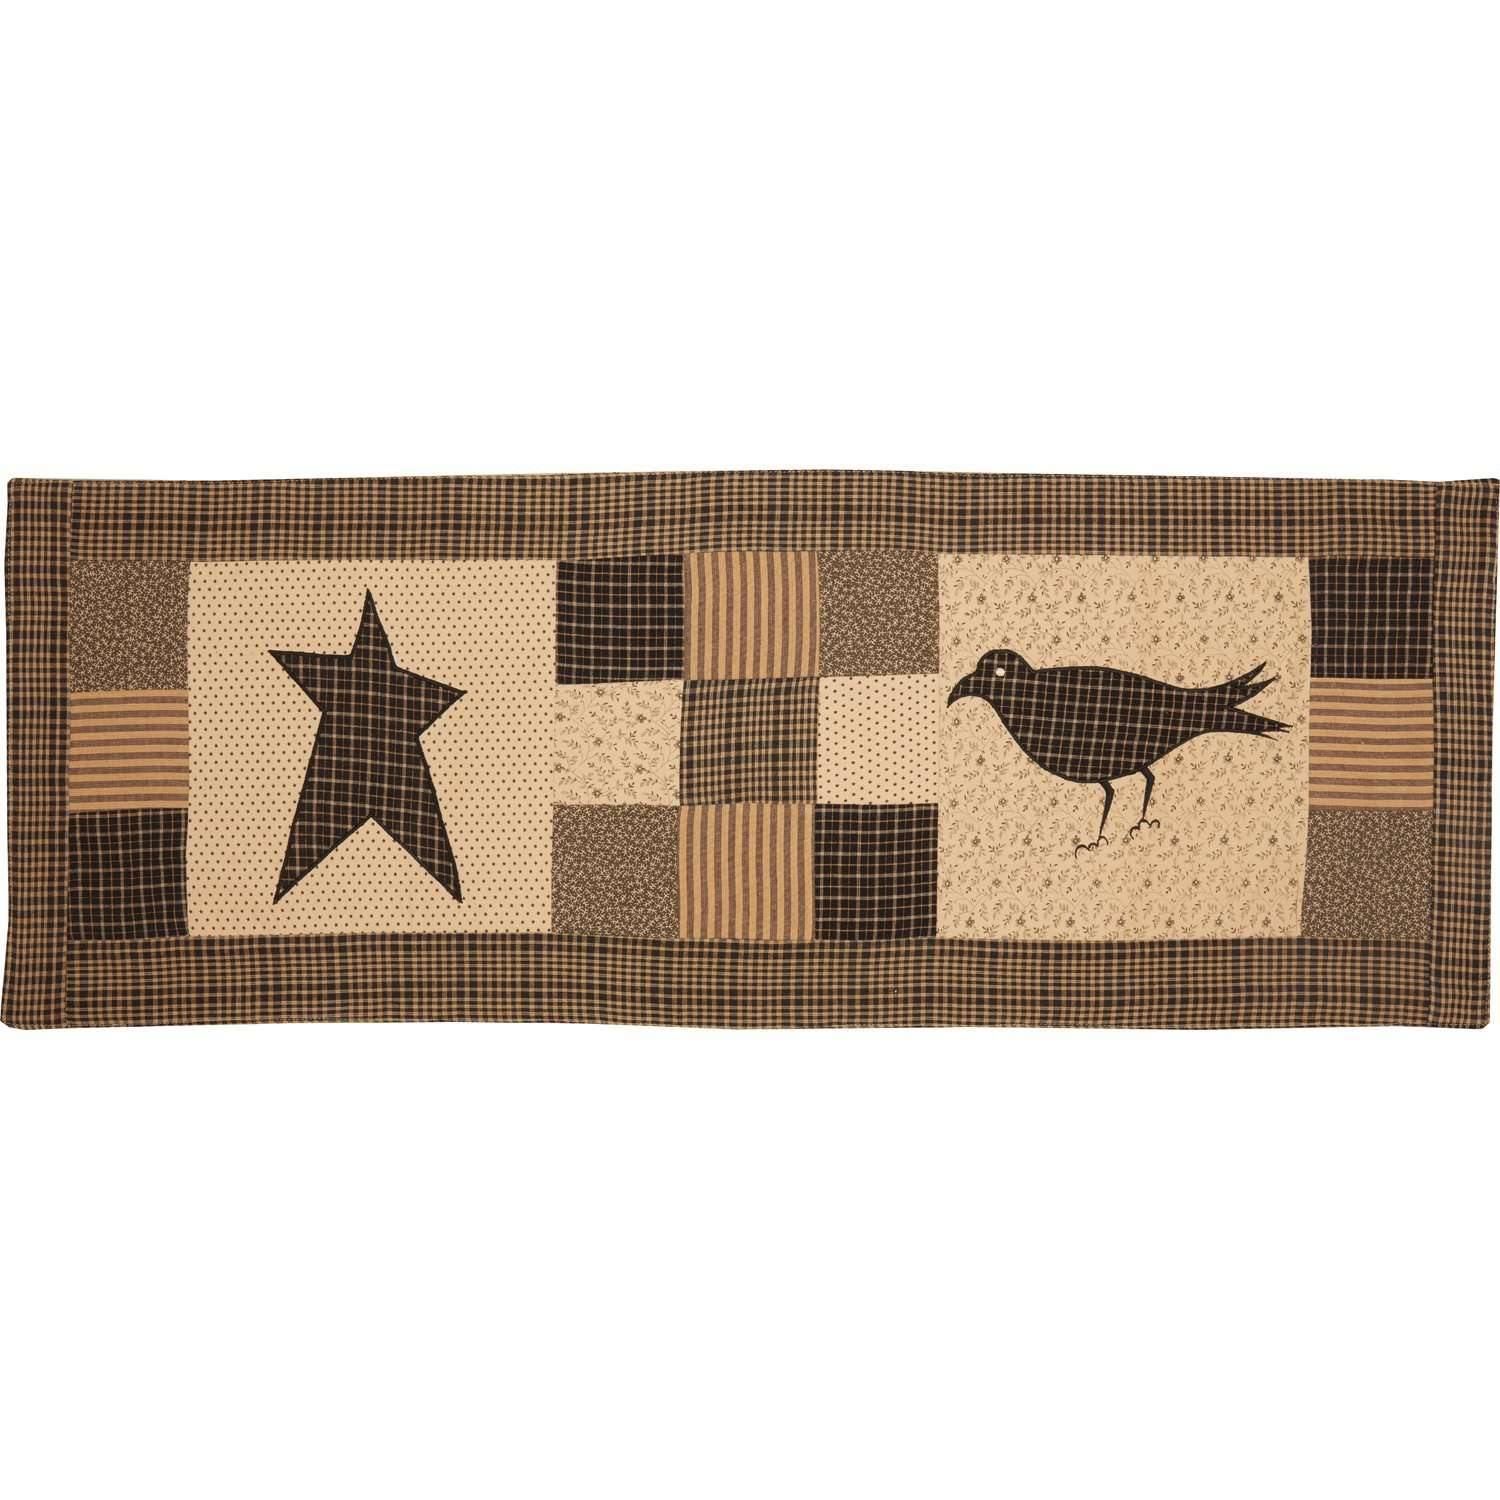 Kettle Grove Runner Crow and Star 13x36 VHC Brands - The Fox Decor